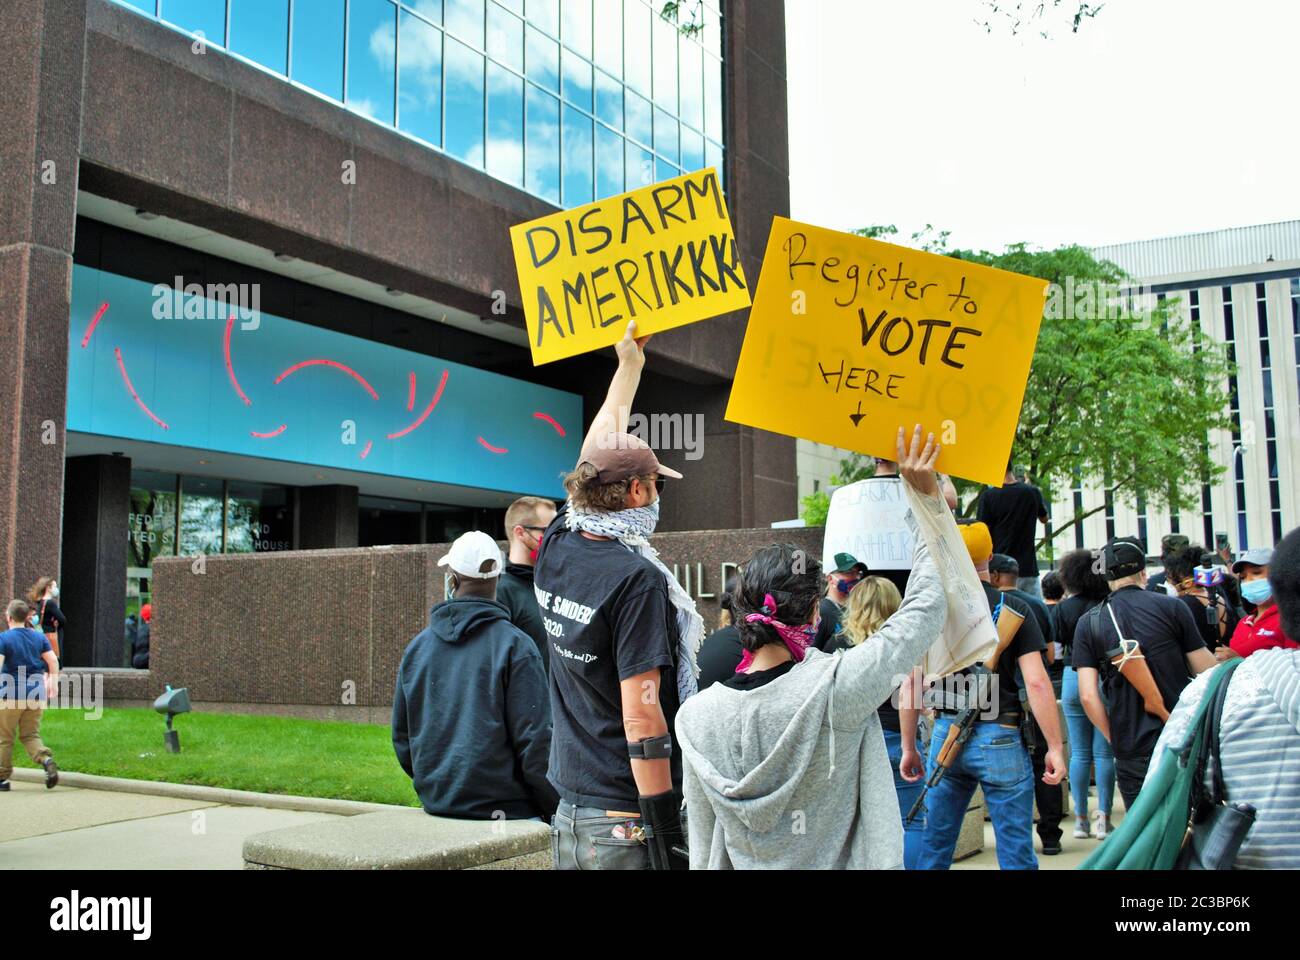 Dayton, Ohio, United States 05/30/2020 protesters at a black lives matter rally holding signs and wearing masks Stock Photo